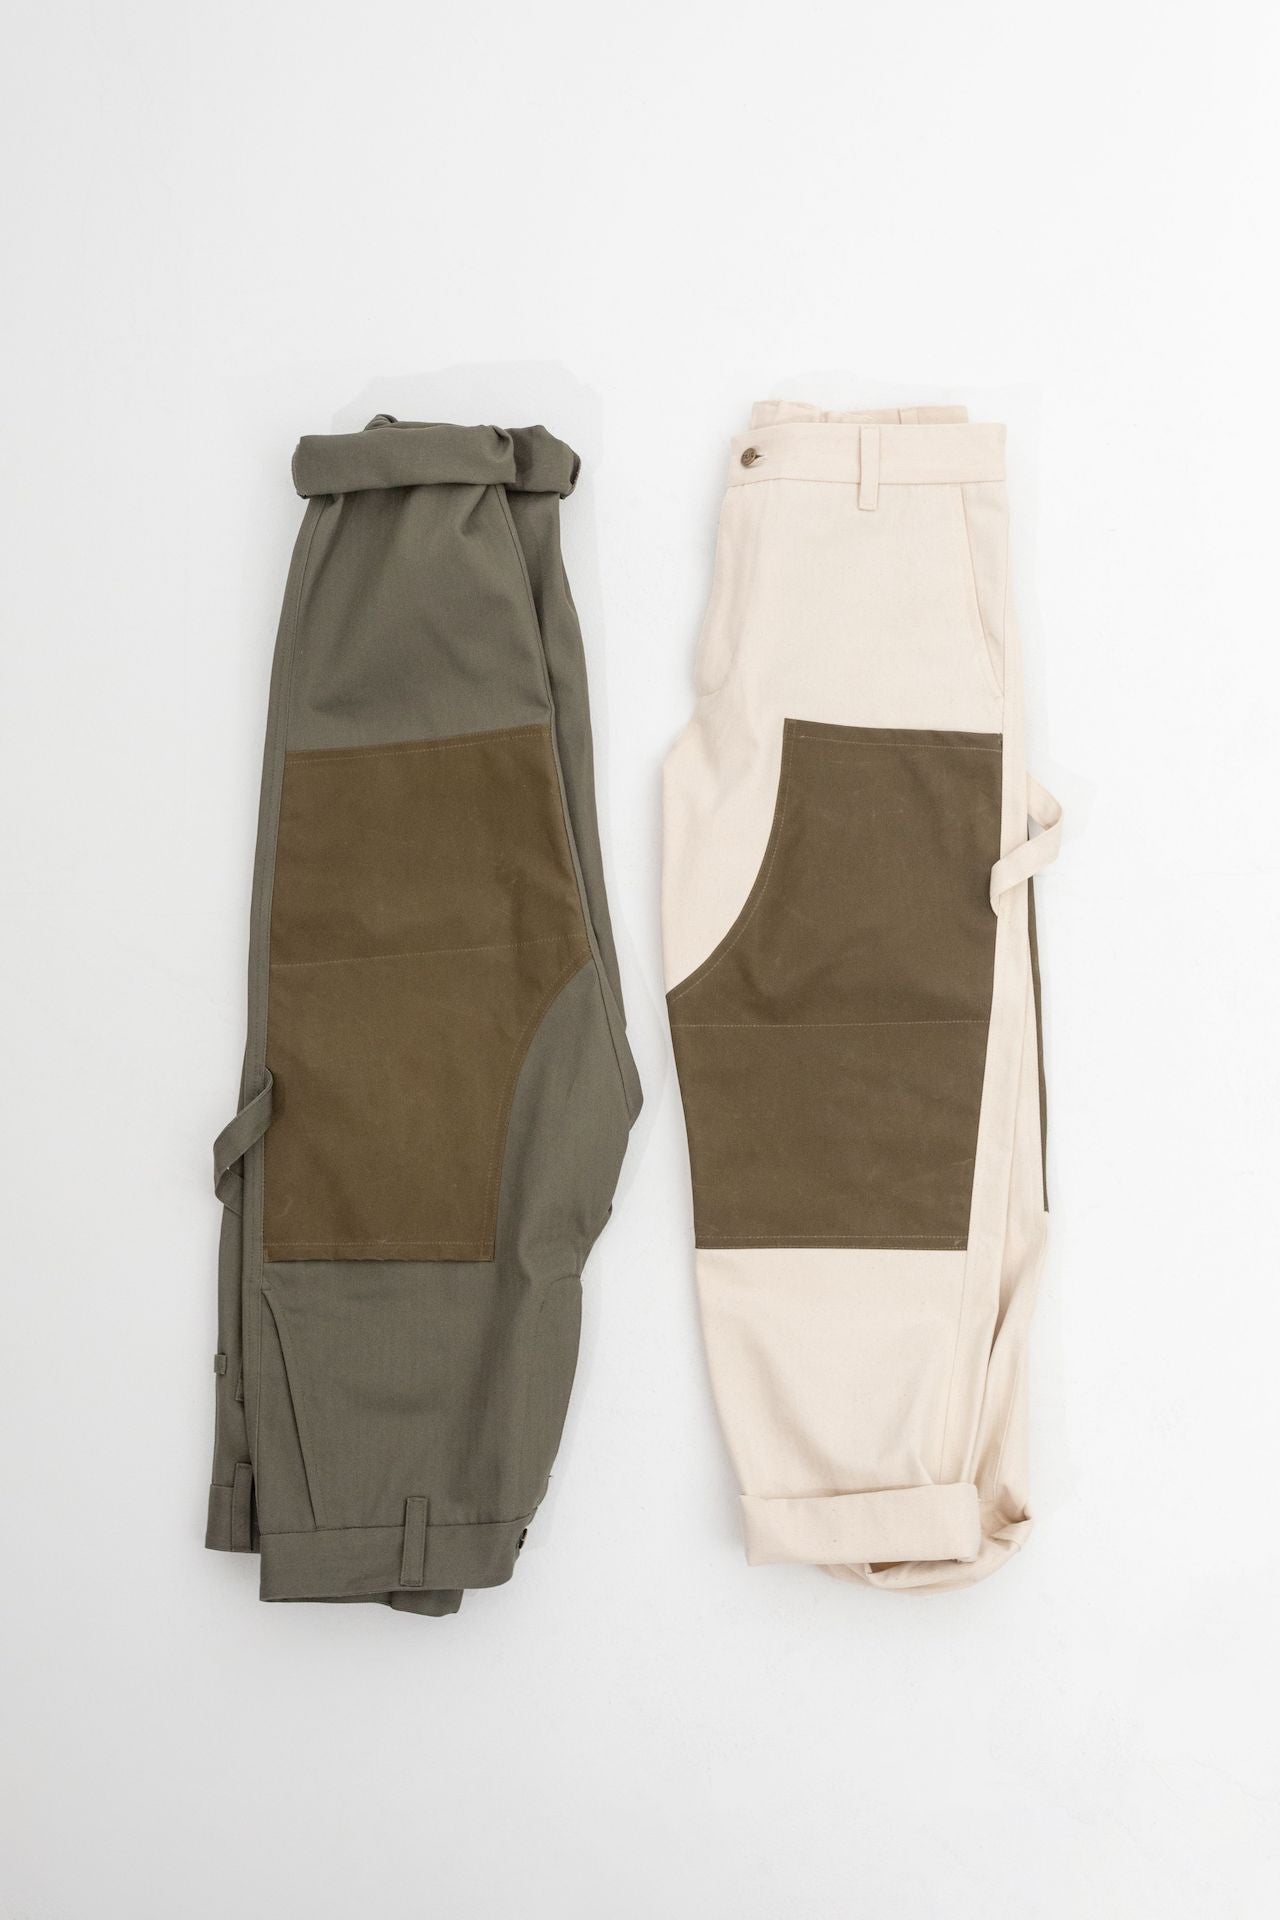 winter Sunday pant - two styles